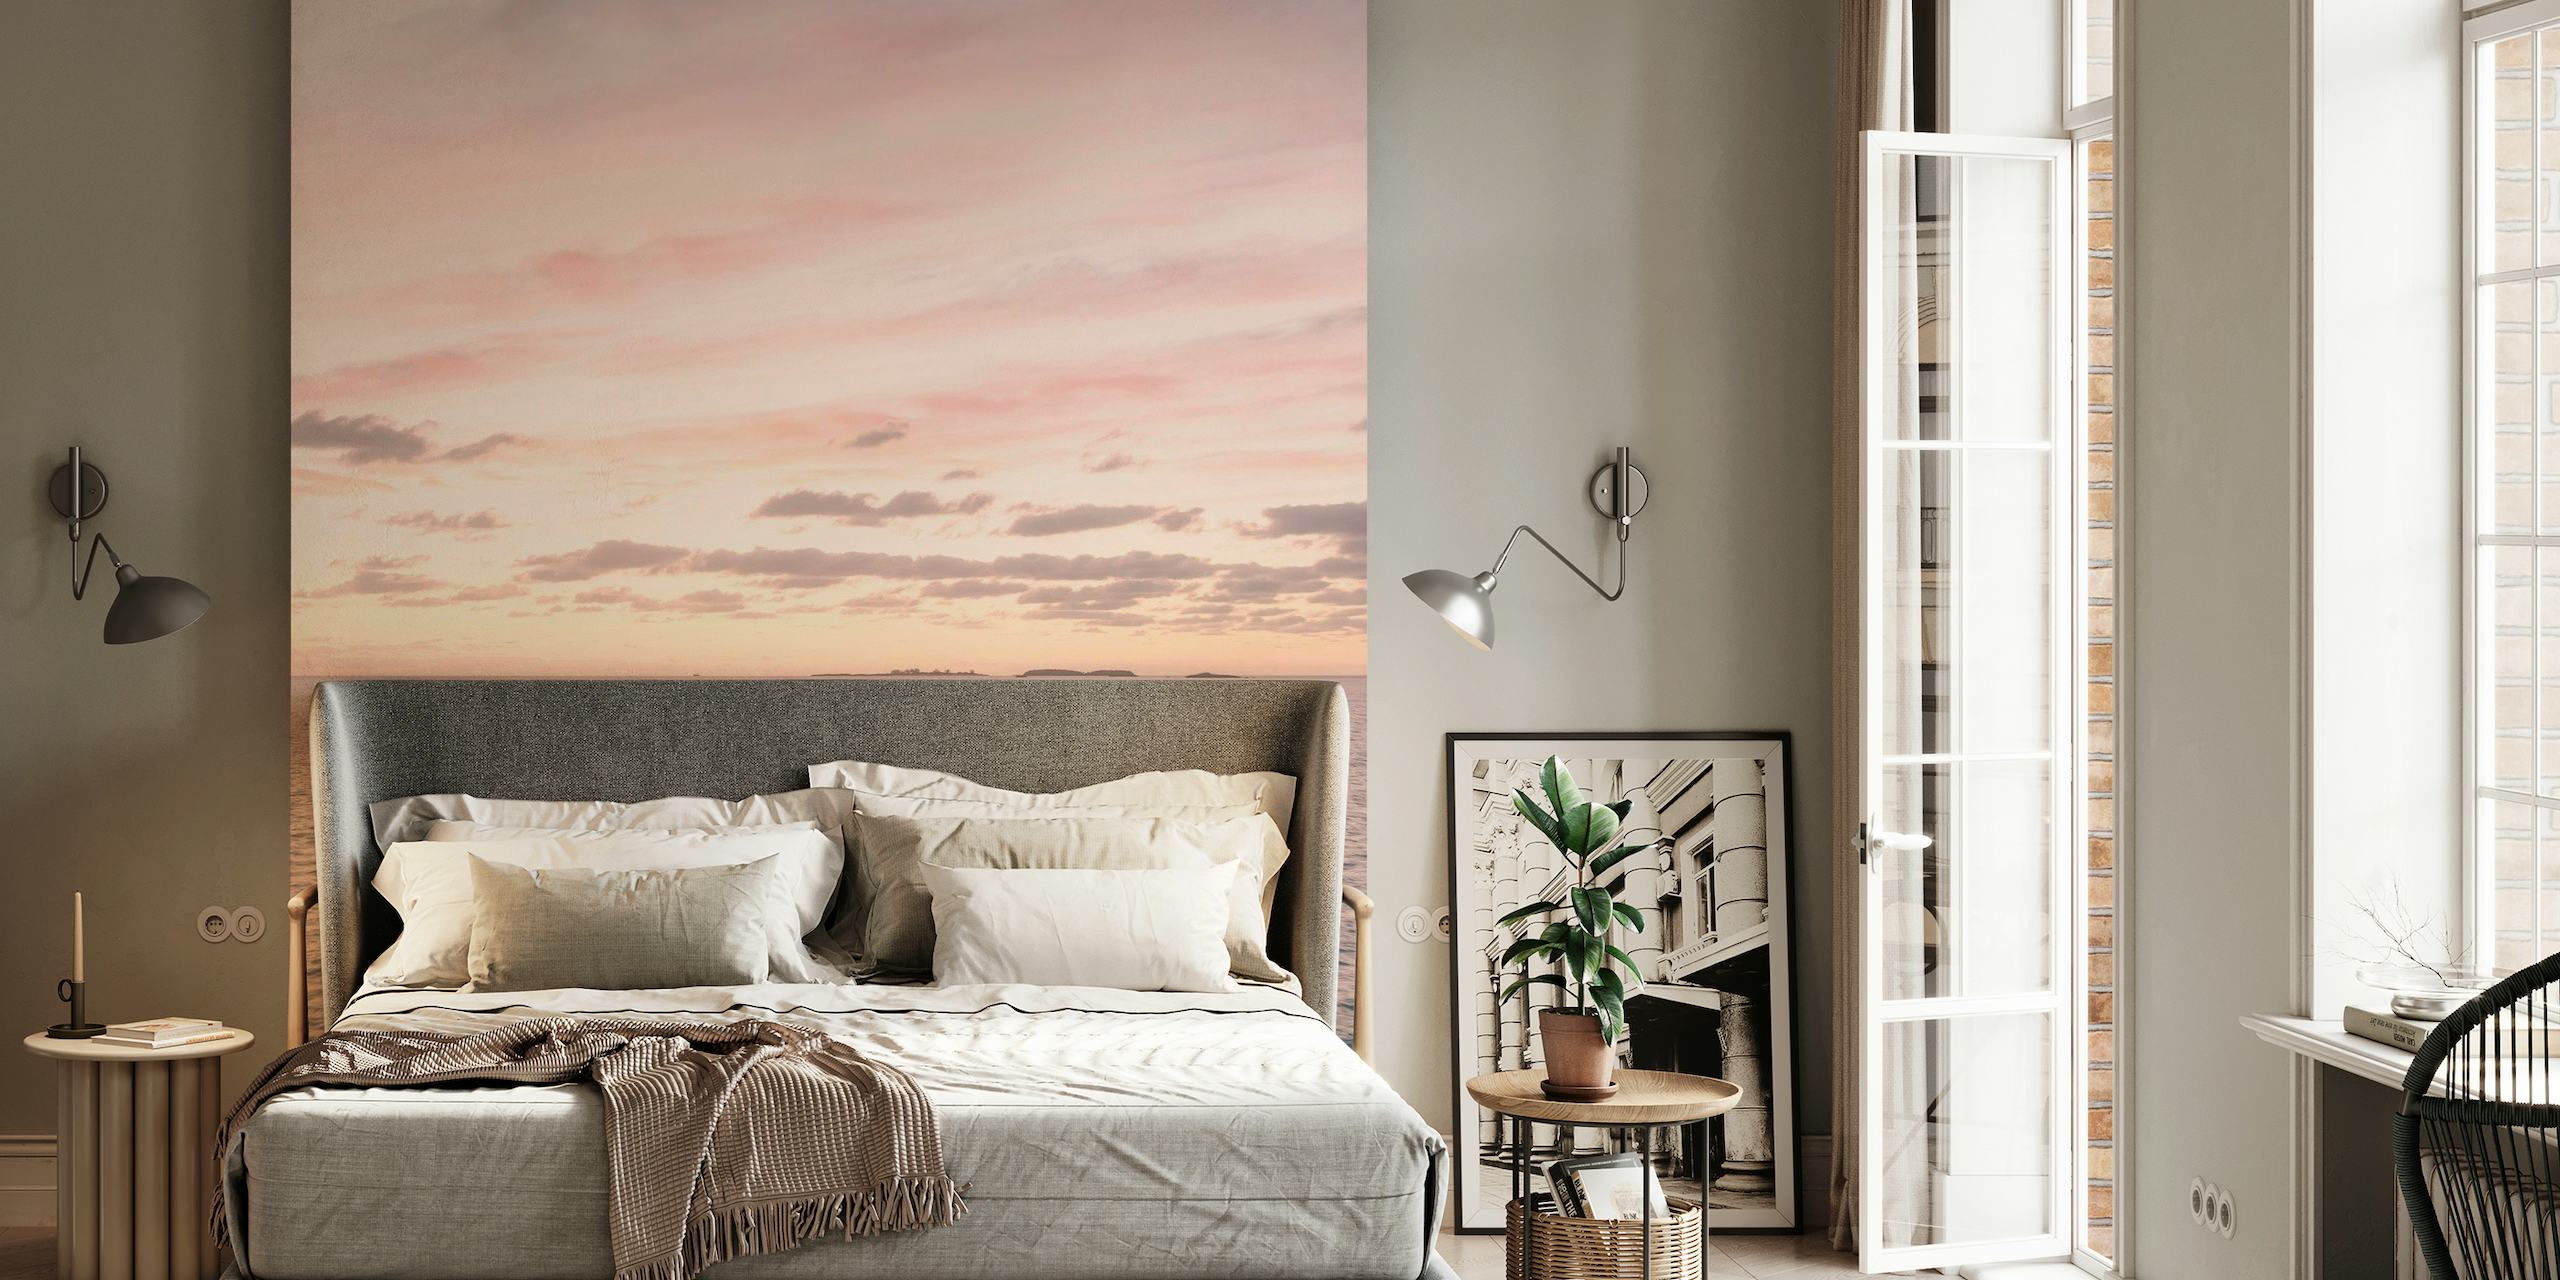 Bahamas sunset wall mural with ocean and soft pink skies